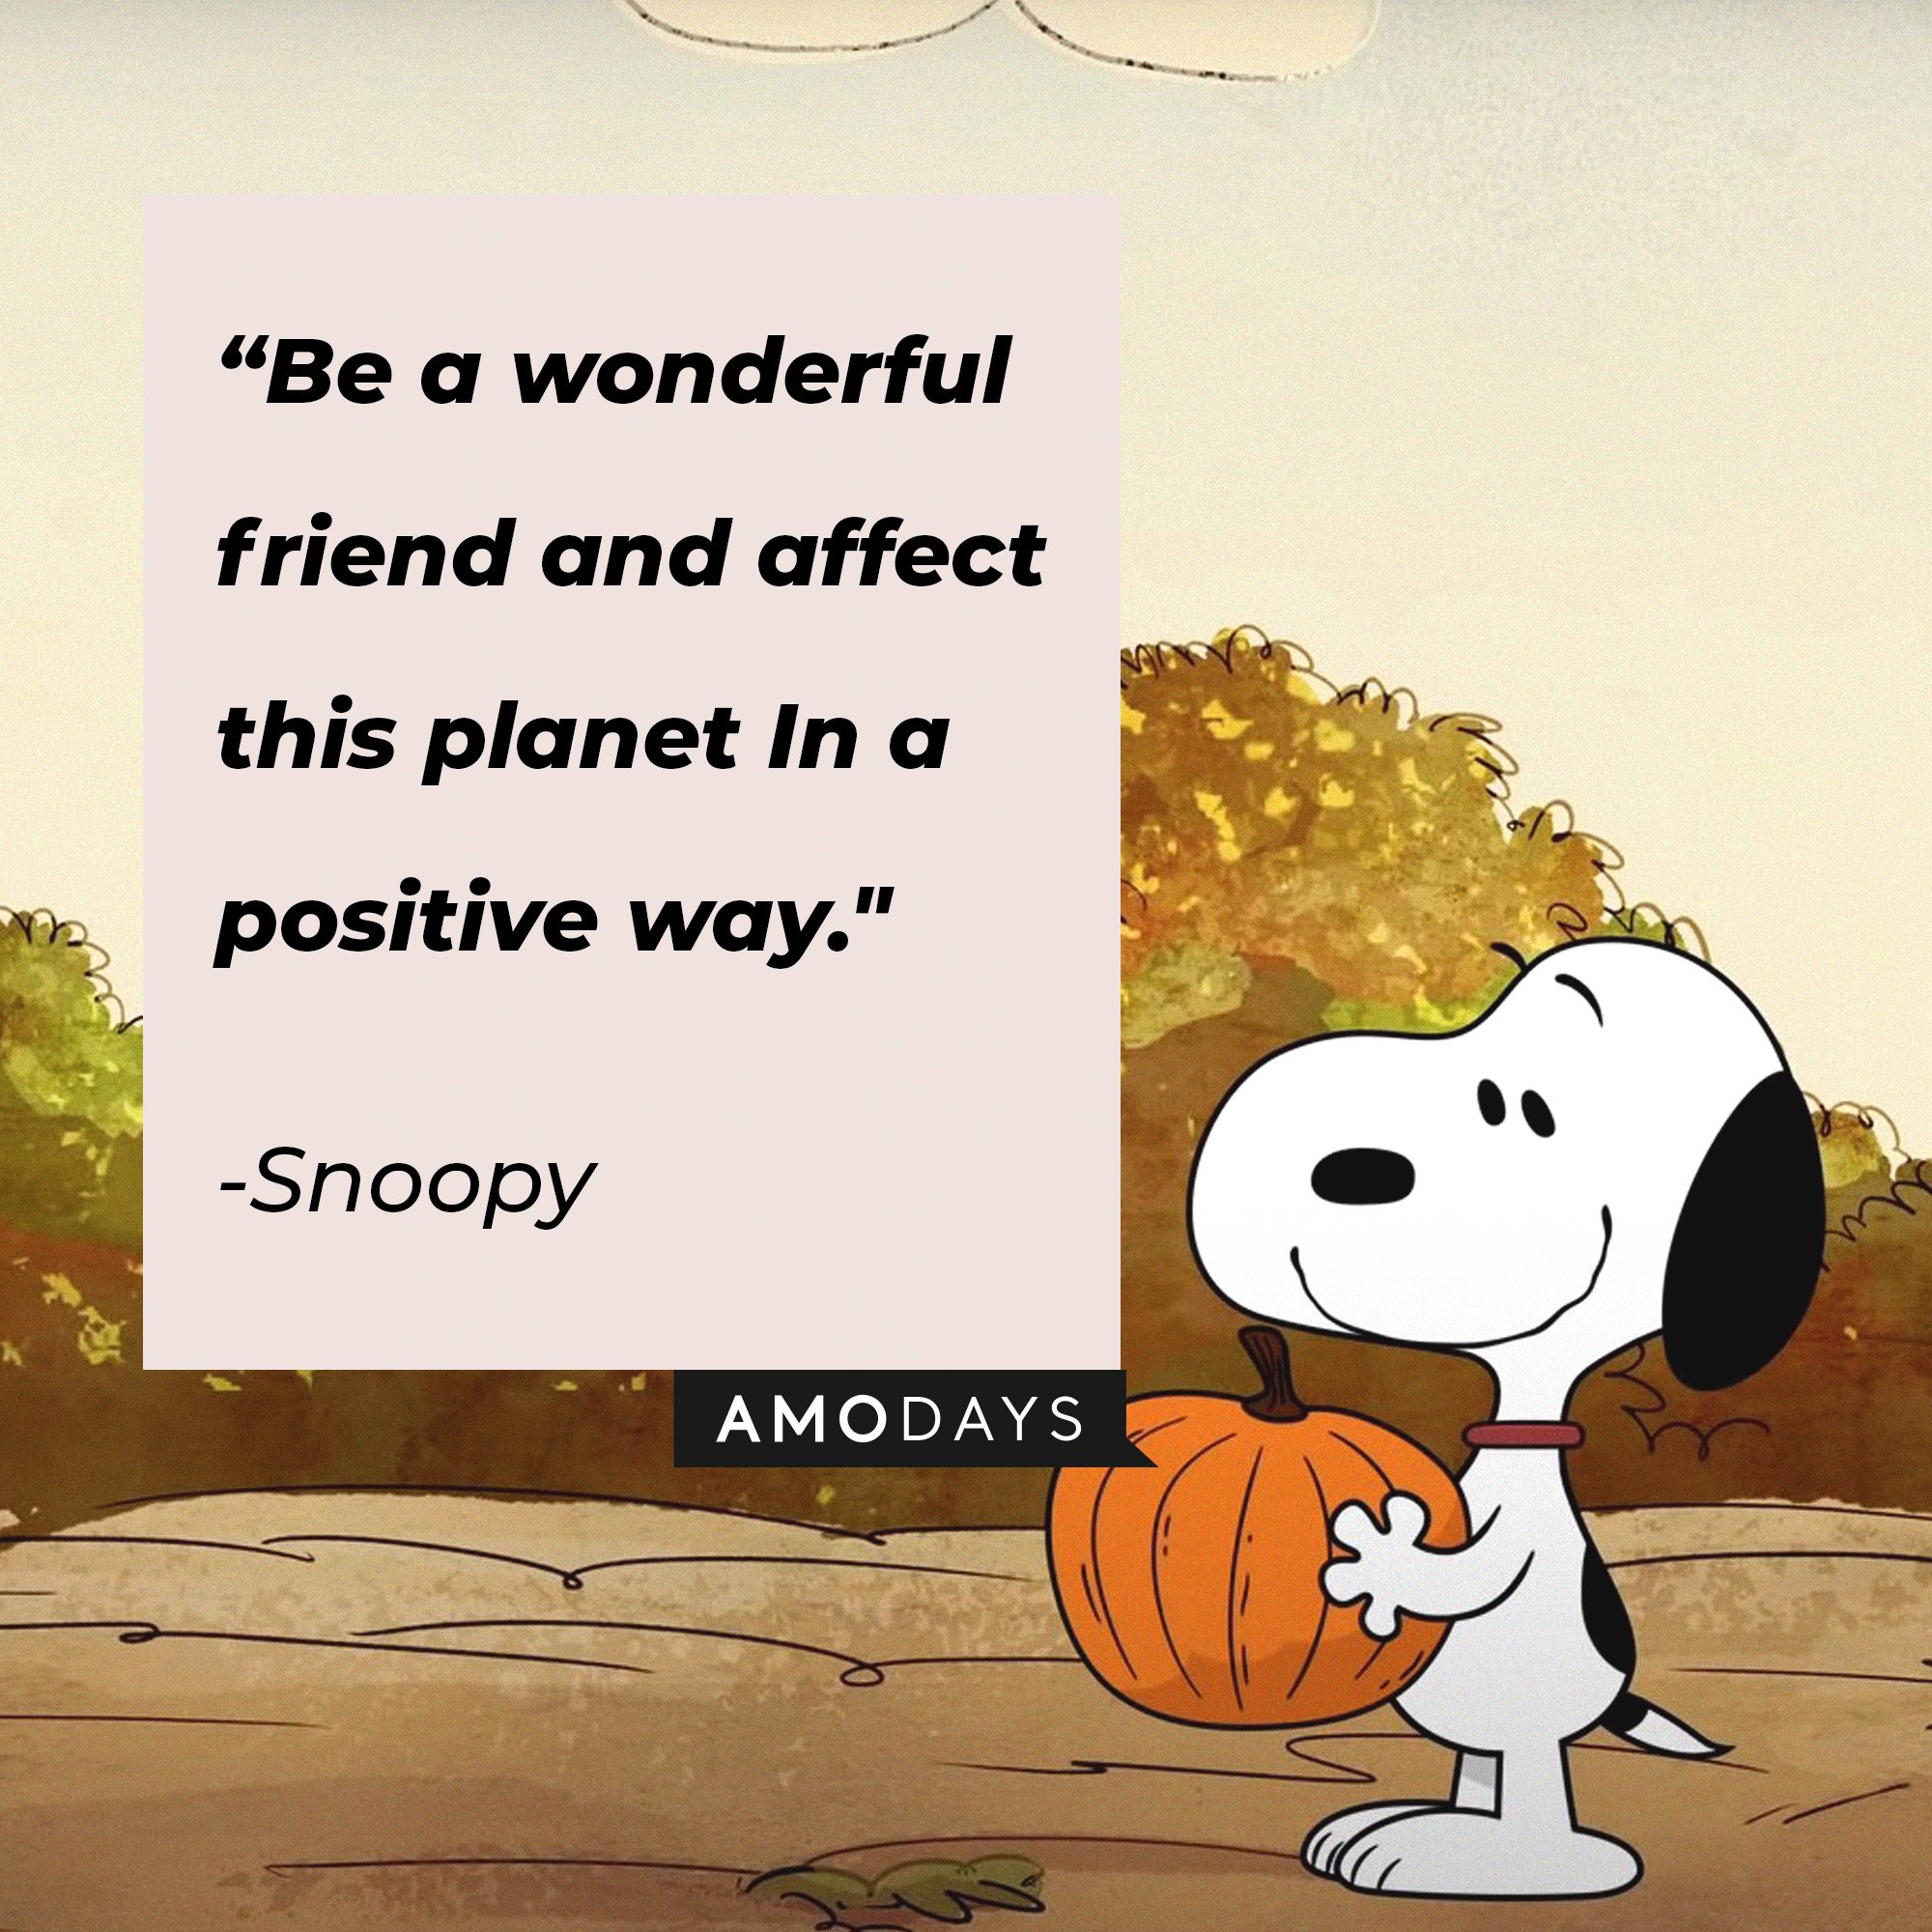 Snoopy’s quote: “Be a wonderful friend and affect this planet In a positive way." | Image: AmoDays